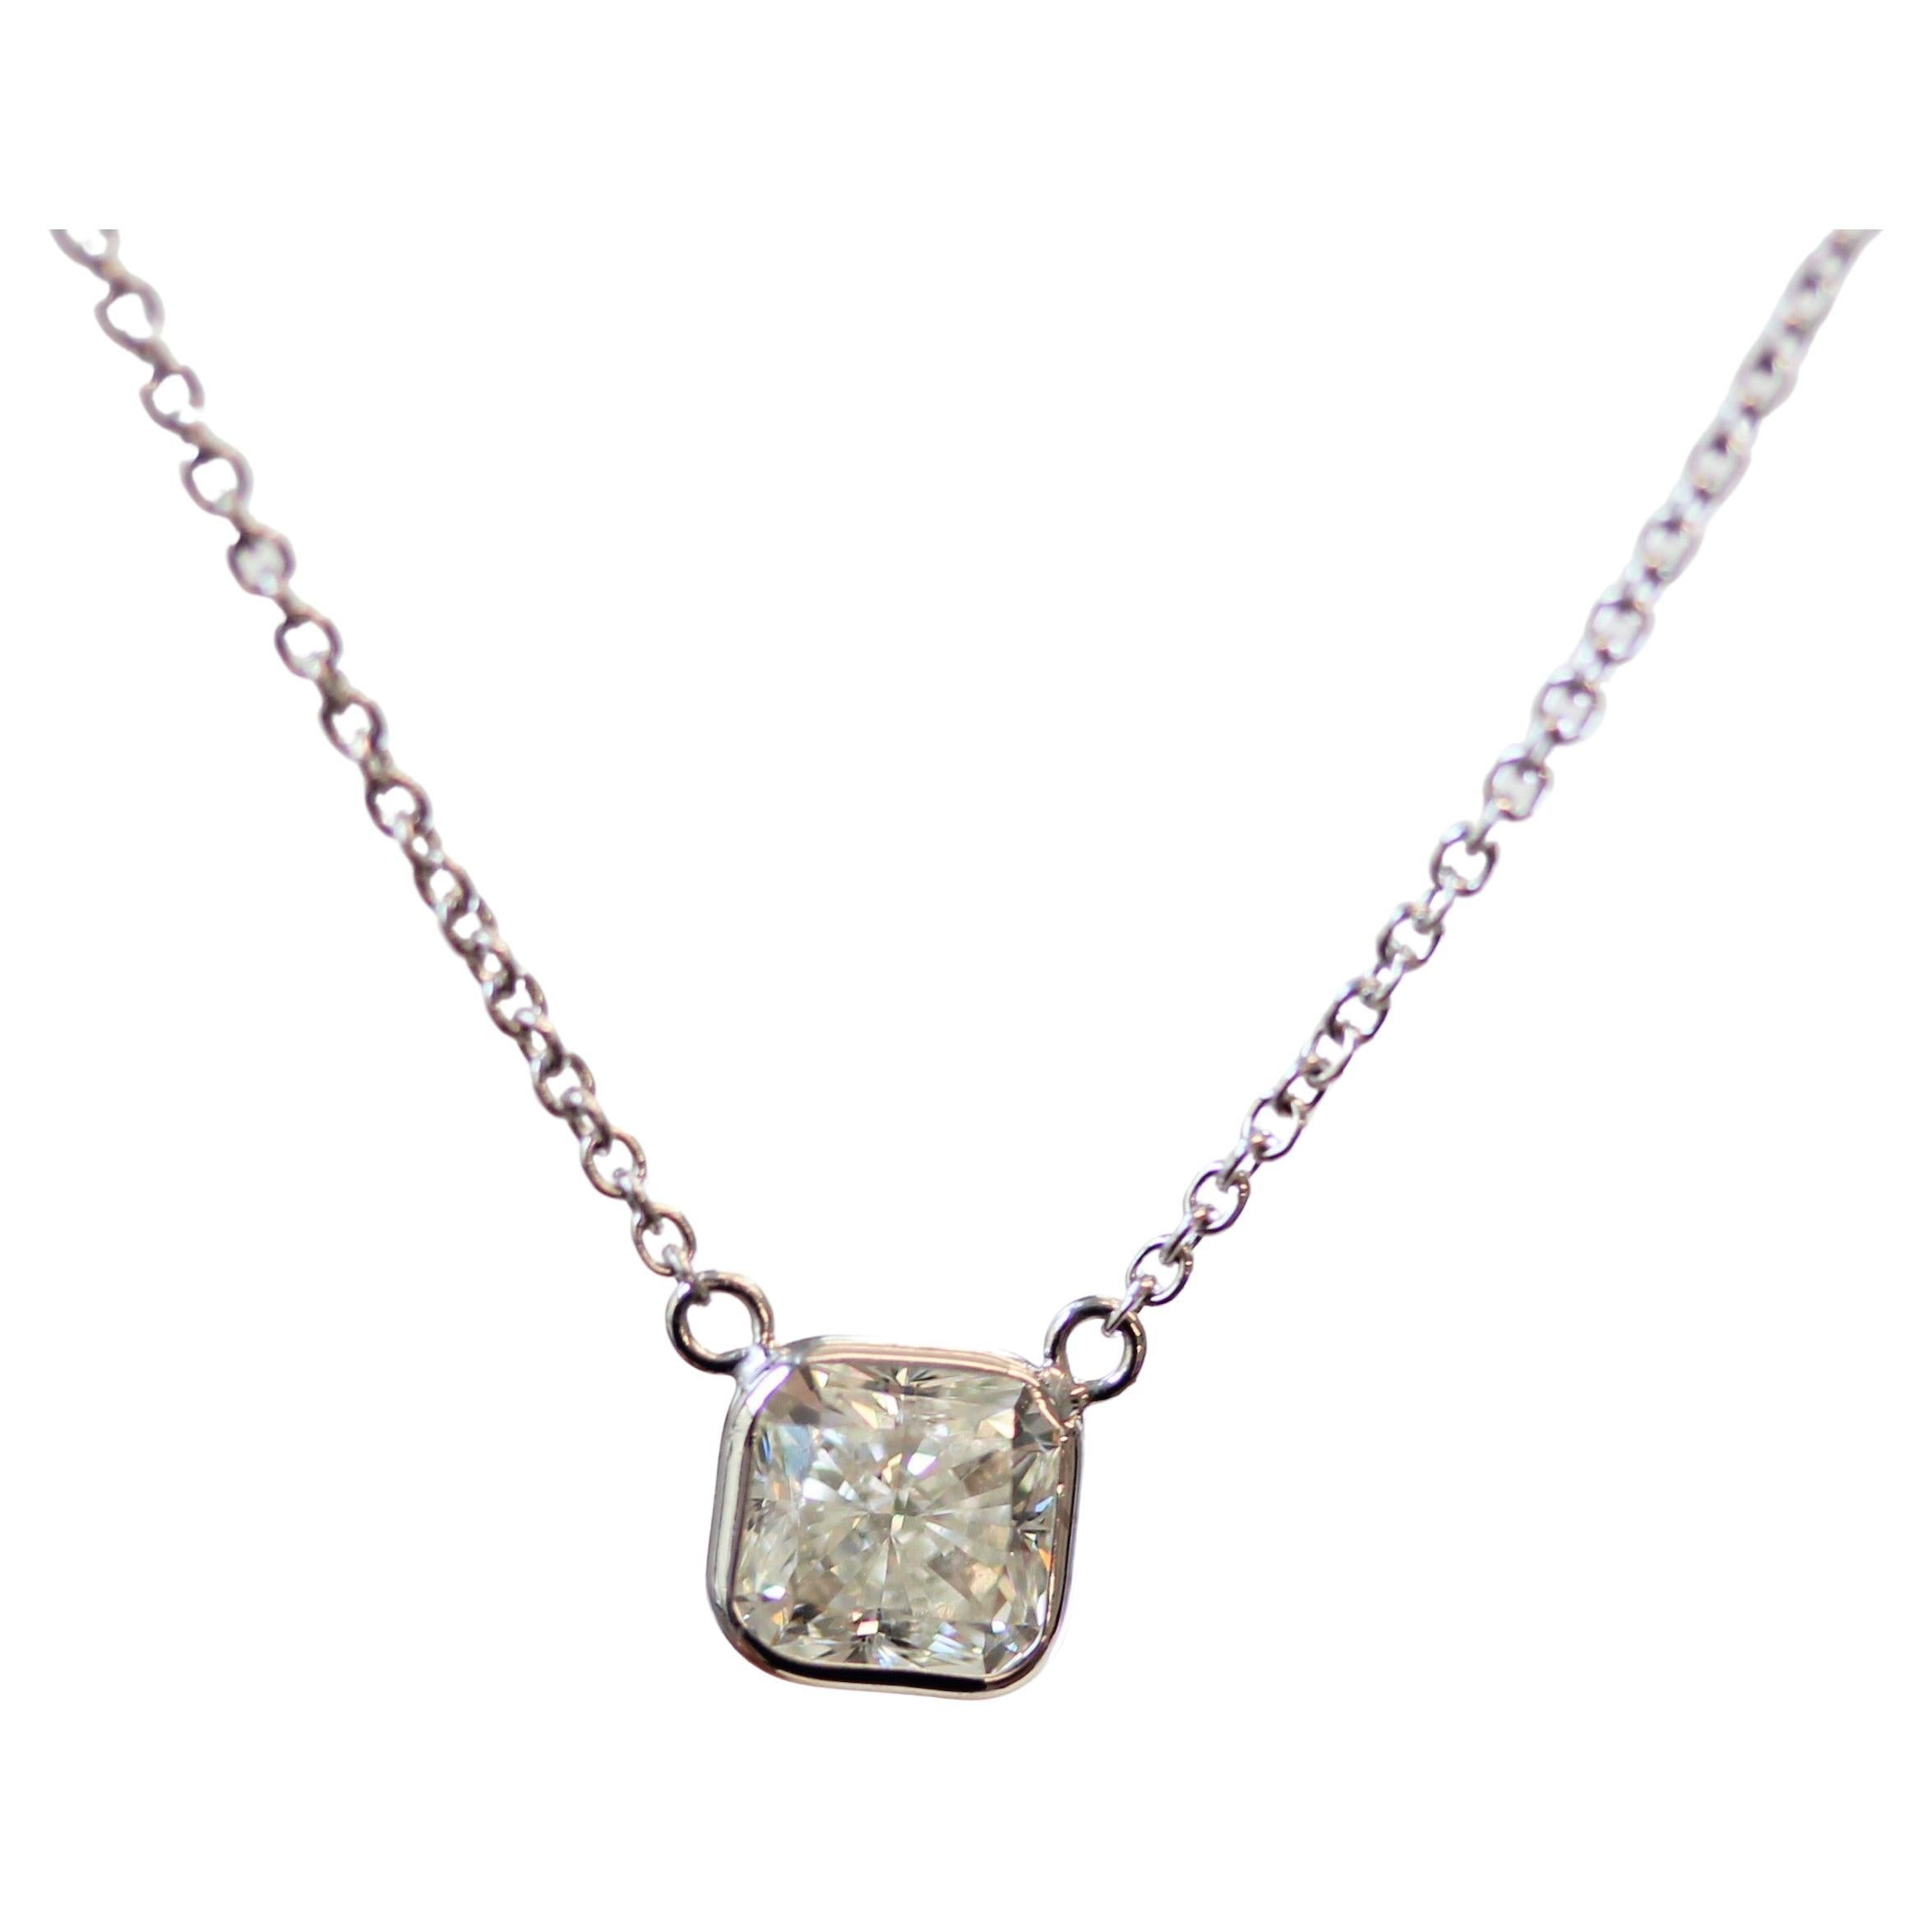 1.15 Carat Diamond Radiant Delicate Handmade Solitaire Necklace In 14k WhiteGold For Sale